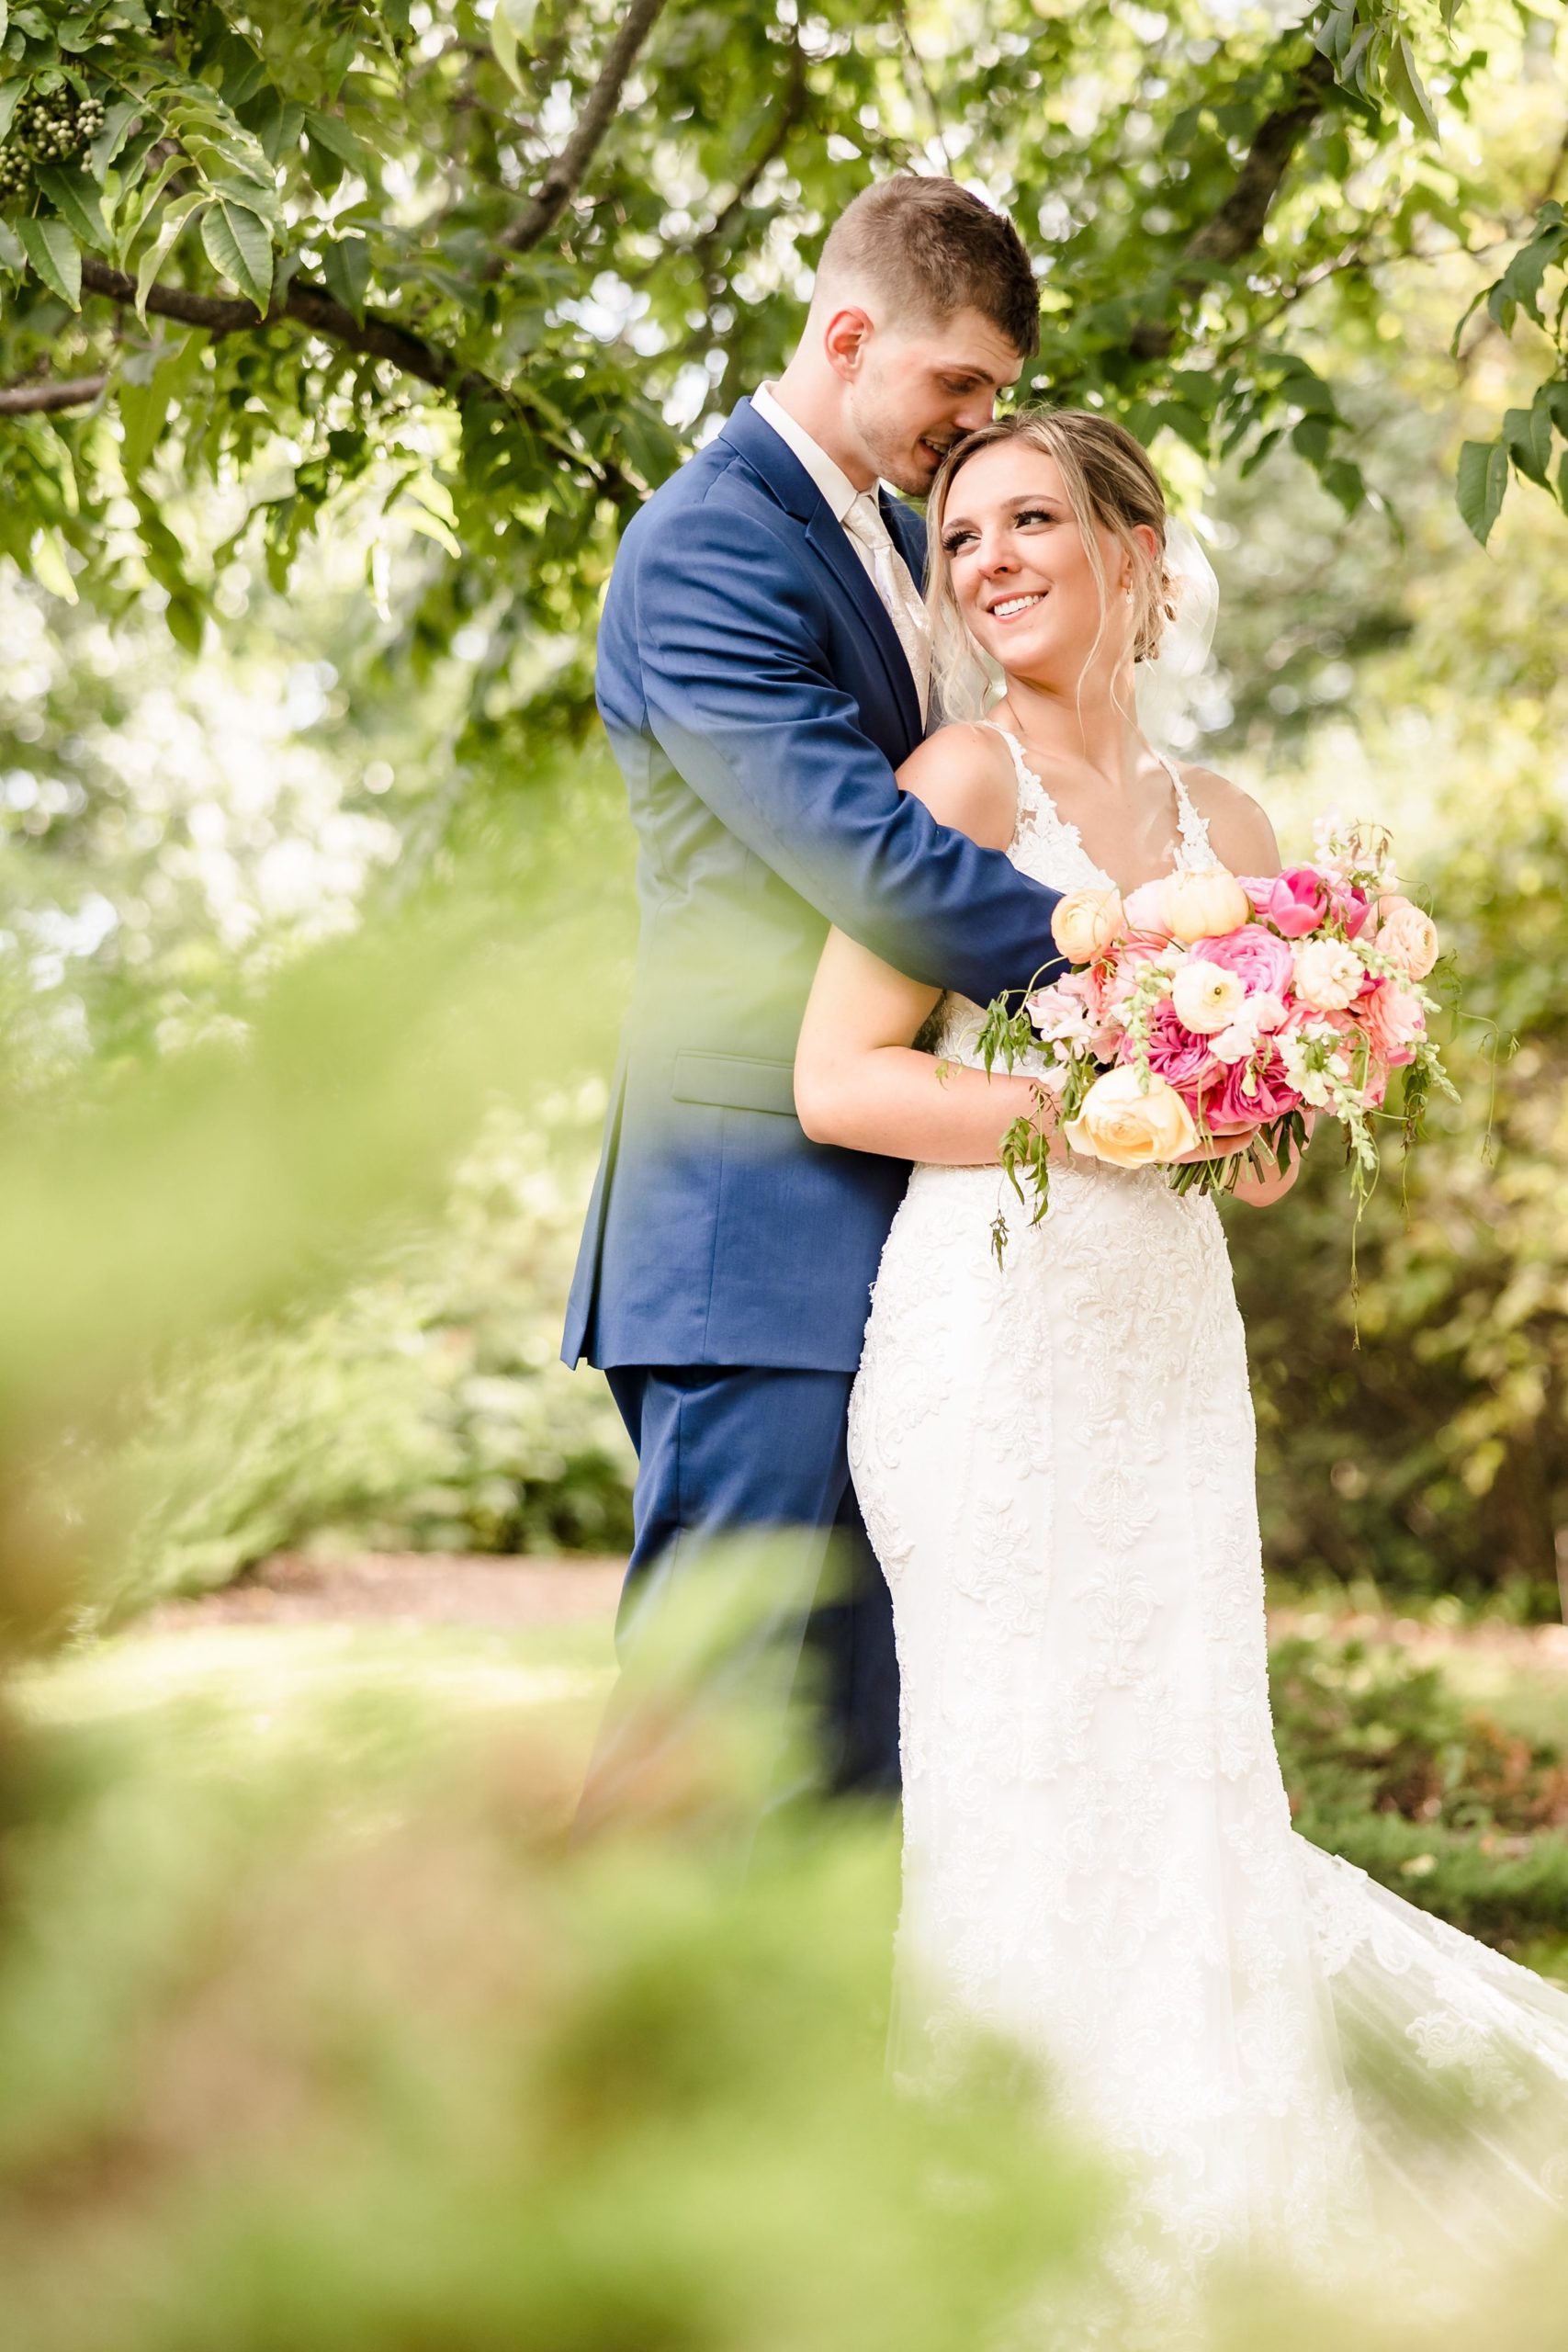 Bride and Groom embrace during their wedding at Luthy Botanical Garden in Peoria, Illinois.